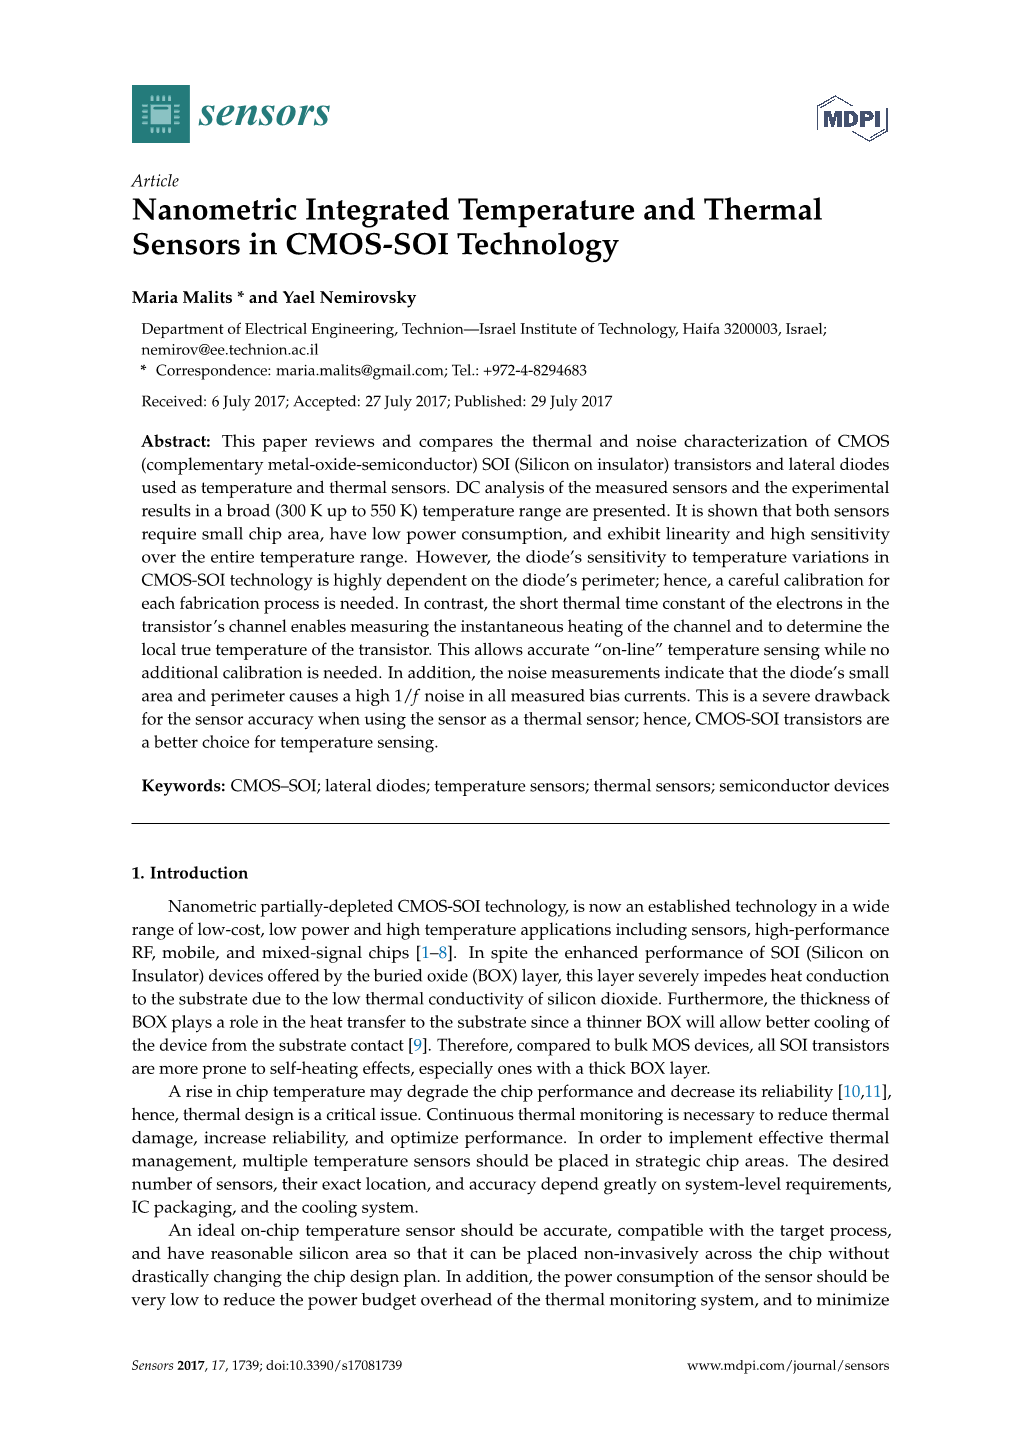 Nanometric Integrated Temperature and Thermal Sensors in CMOS-SOI Technology